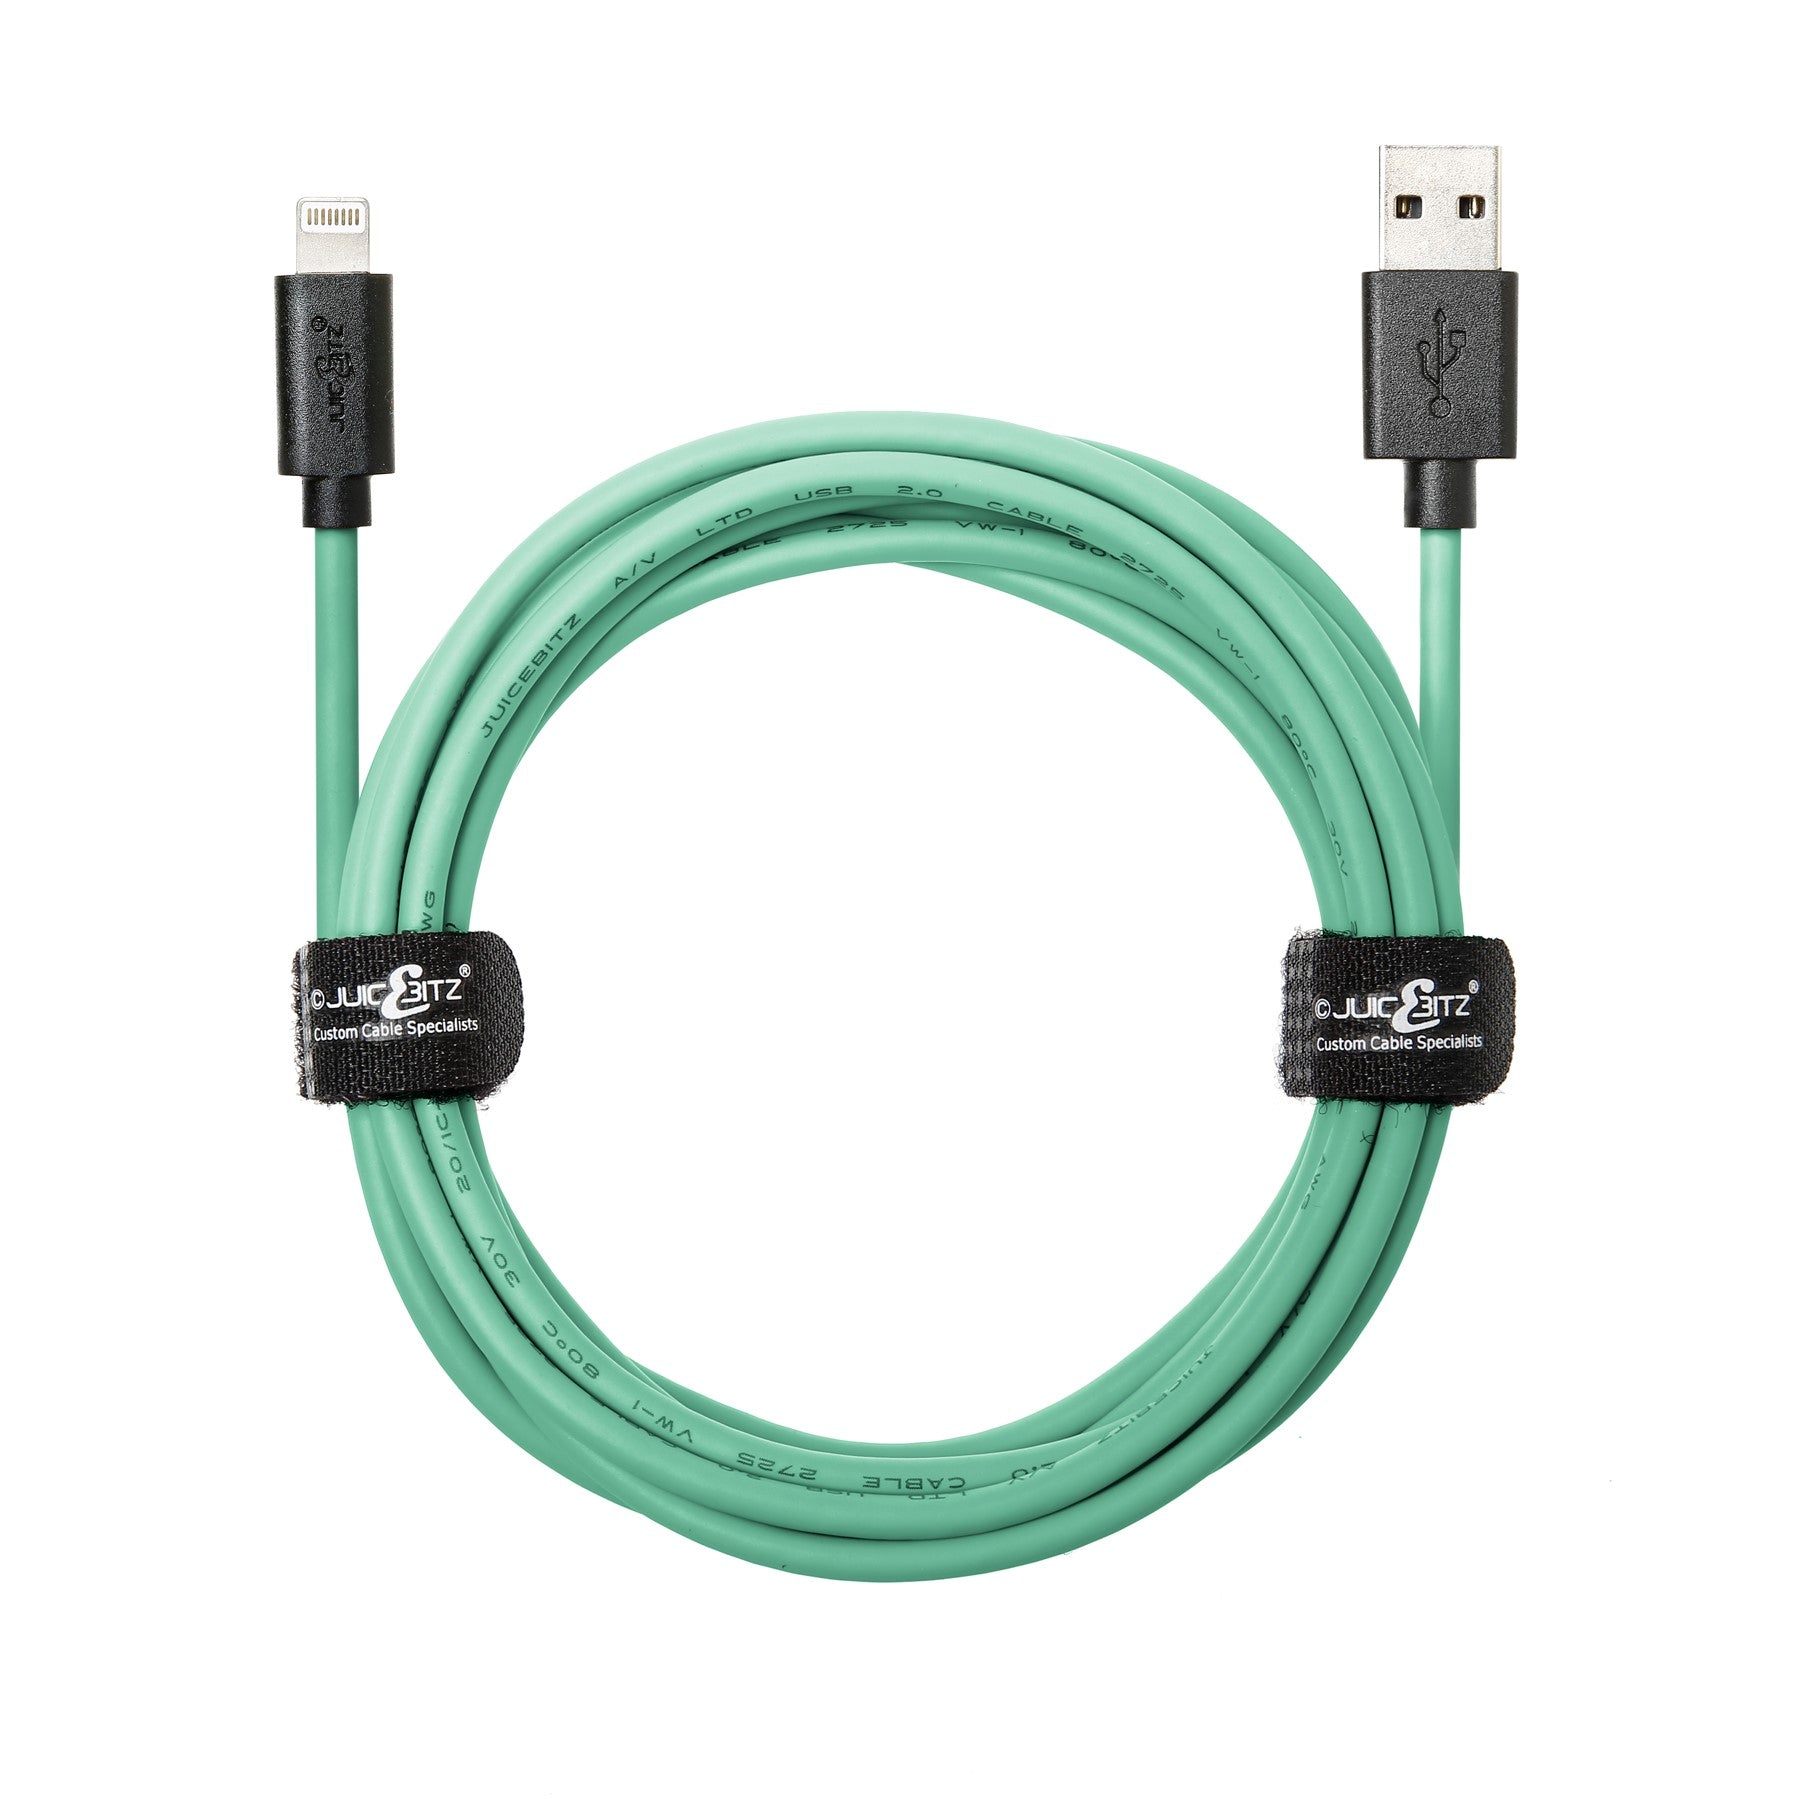 USB Charger Cable Data Sync Lead for iPhone, iPad, iPod - Green